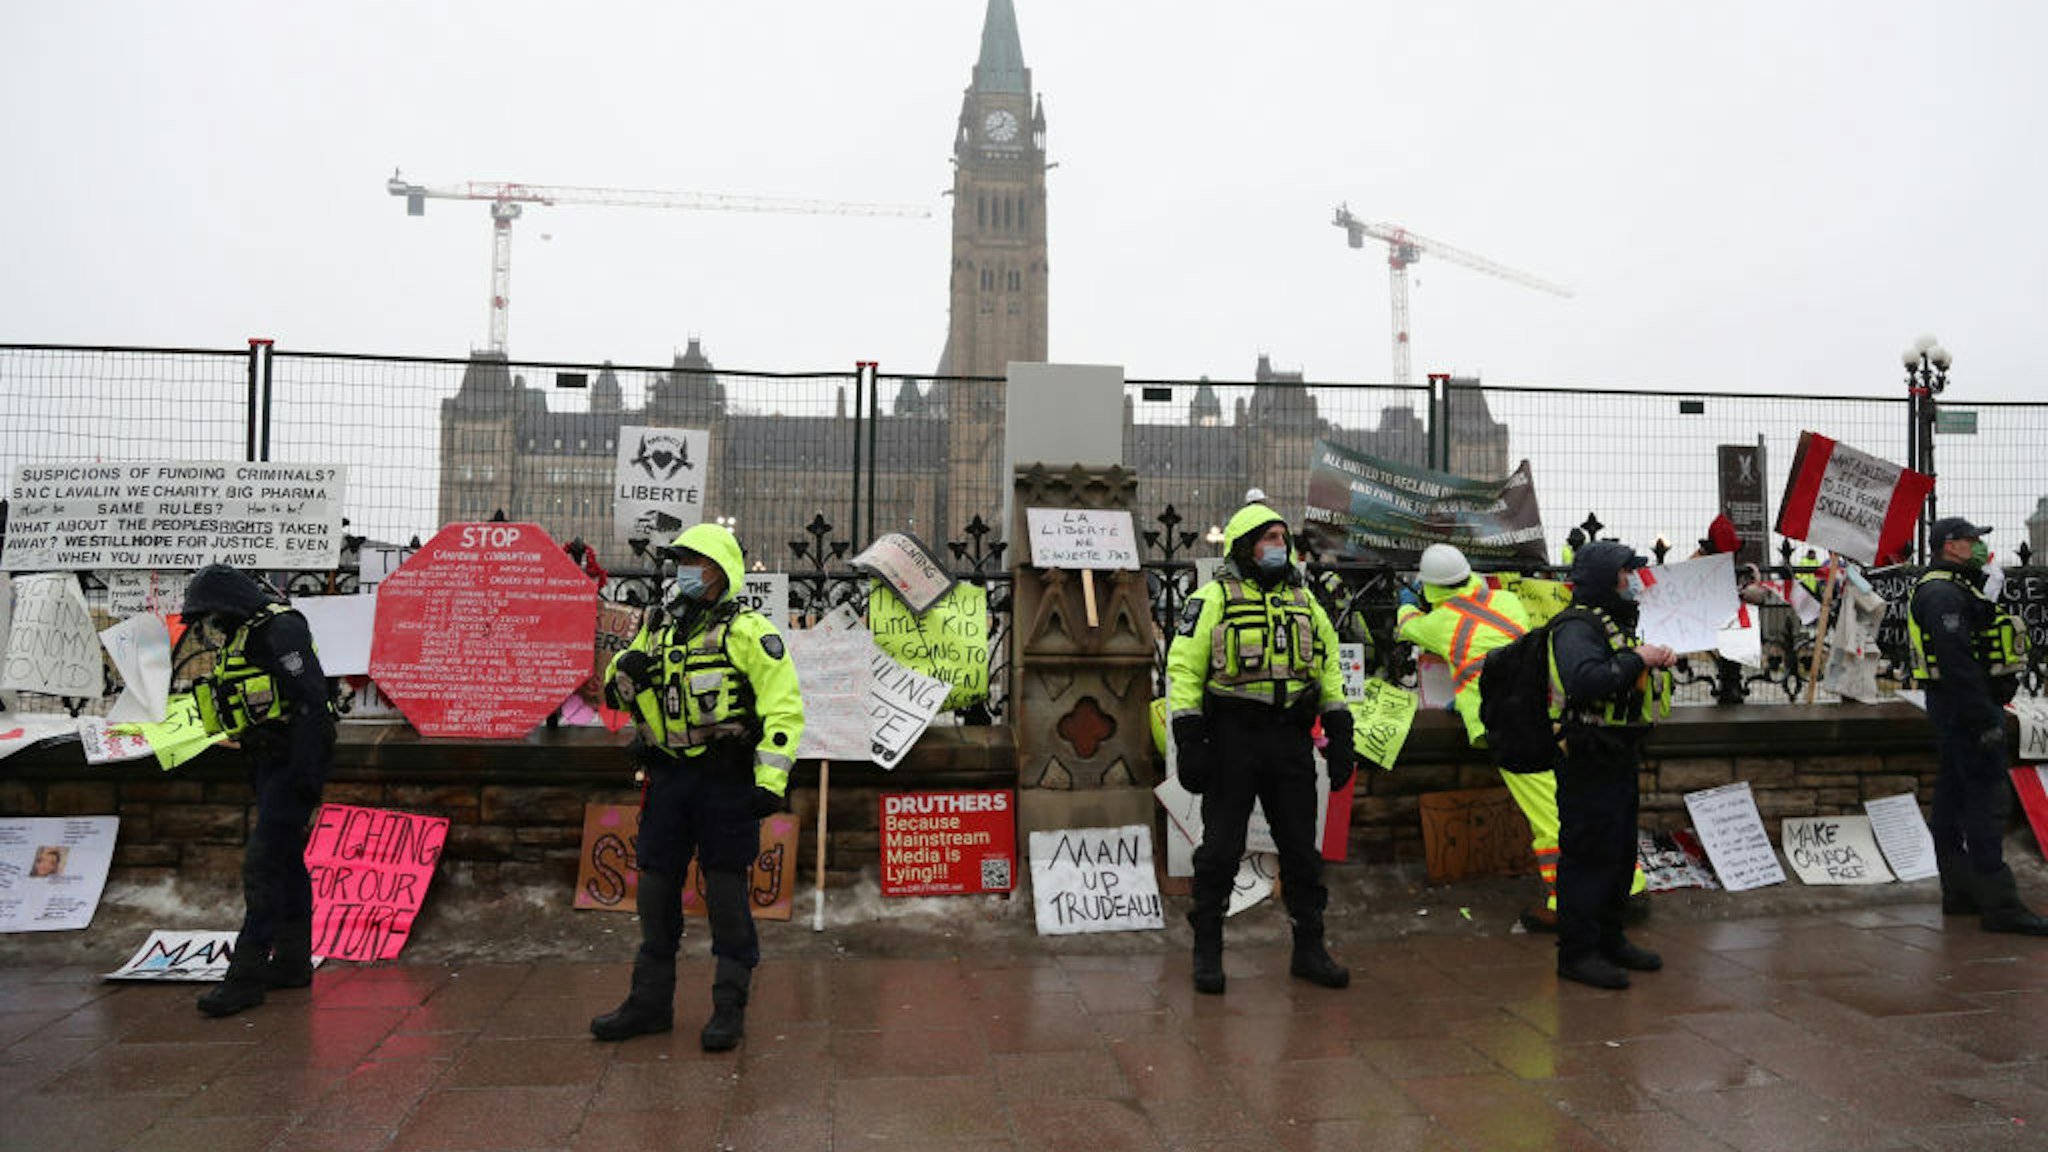 Police officers patrol a street in front of Parliament Hill during a demonstration in Ottawa, Ontario, Canada, on Thursday, Feb. 17, 2022. Police told demonstrators camped out on the streets of Canada's capital that they must leave or be subject to arrest under new emergency powers invoked by Prime Minister Justin Trudeau and Ontario's provincial government. Photographer: David Kawai/Bloomberg